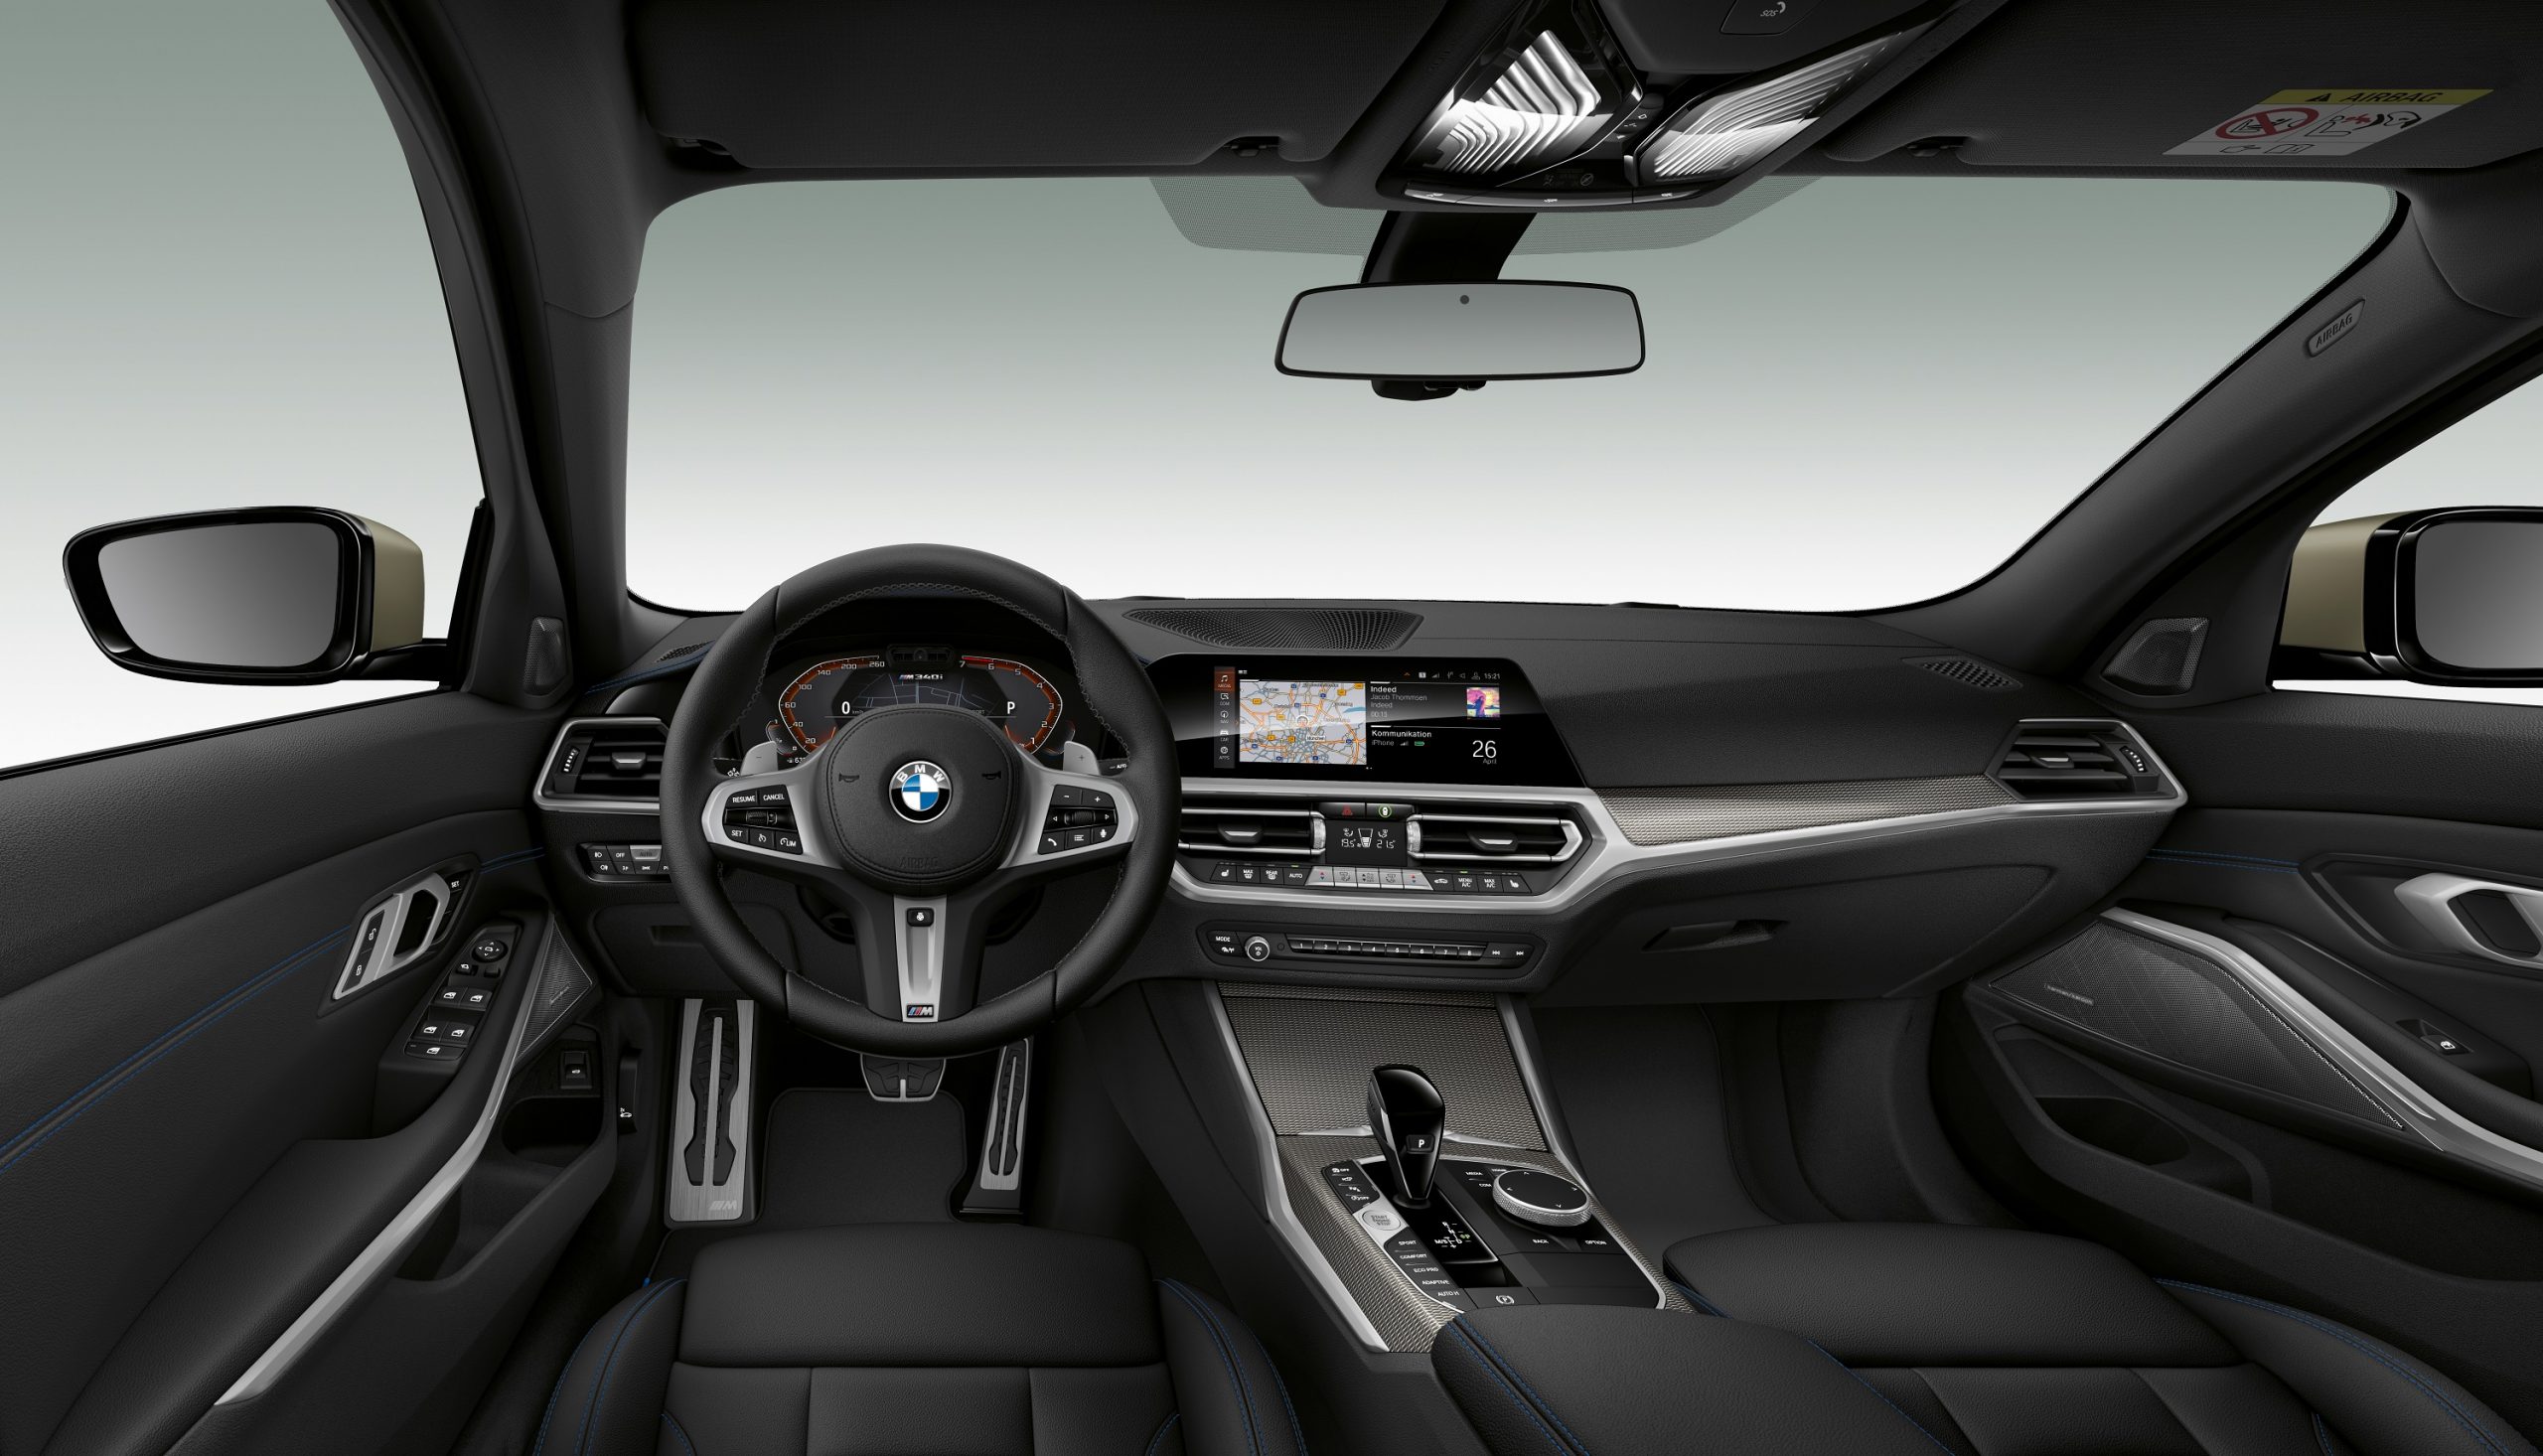 The 2022 BMW 3 Series interior with chrome trim and black leather